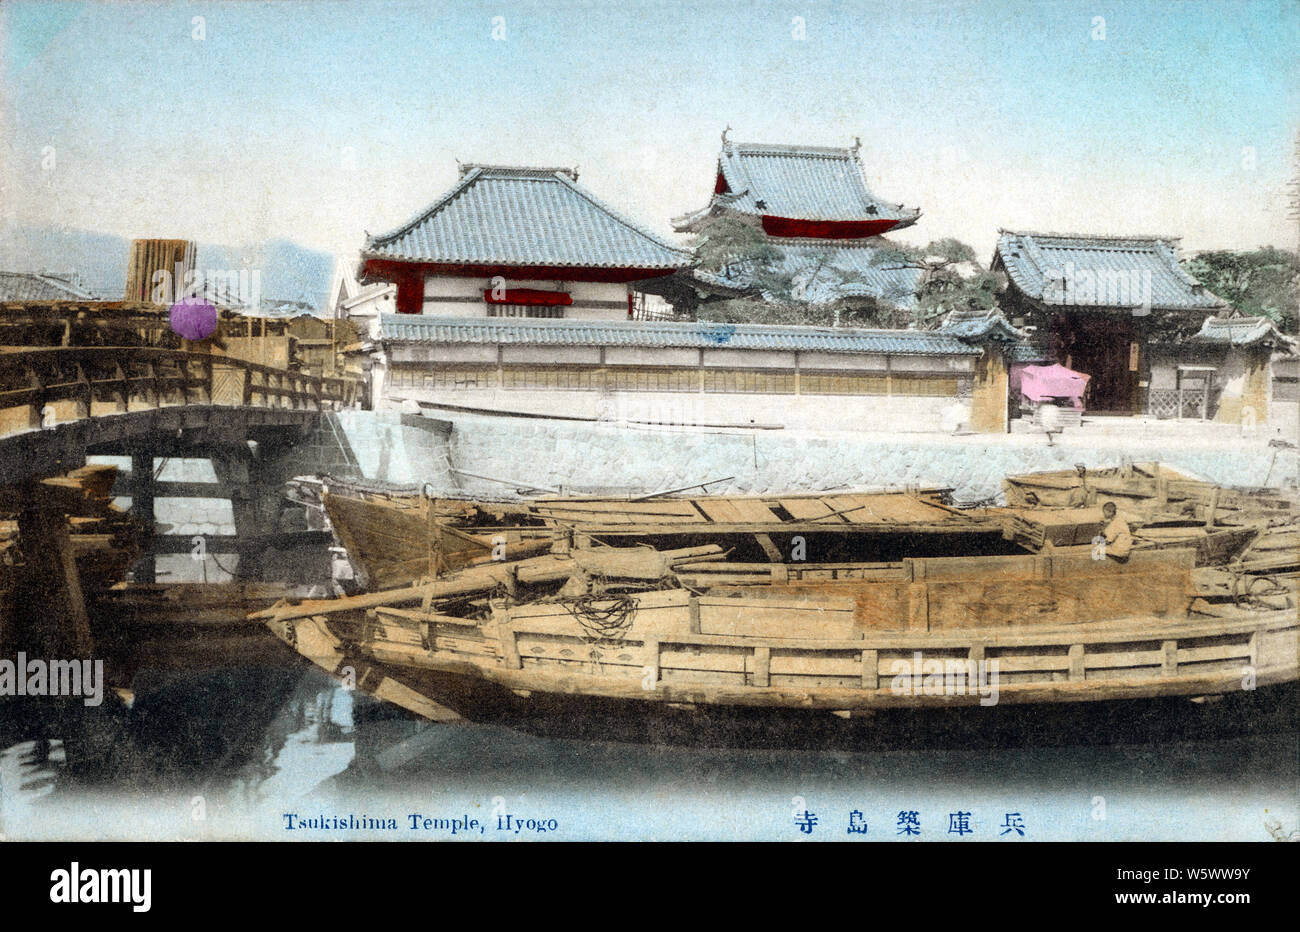 [ 1900s Japan - Japanese Boats and Buddhist Temple ] —   Boats at anchor at Tsukishima Temple (築嶋寺) in Shimagami-cho (島上町) in Hyogo (兵庫), Kobe. Made famous by an ukiyoe print in the Tokaido Meisho No Uchi series ( 東海道名所之内) created by Chikamaru Yukawa (湯川周麿), the temple was destroyed in the Hanshin Awaji Great Earthquake of 1995 (Heisei 7) and rebuilt in concrete. The wooden bridge on this image has been replaced by a huge storm barrier and the temple now has two large concrete buildings on both sides.  20th century vintage postcard. Stock Photo